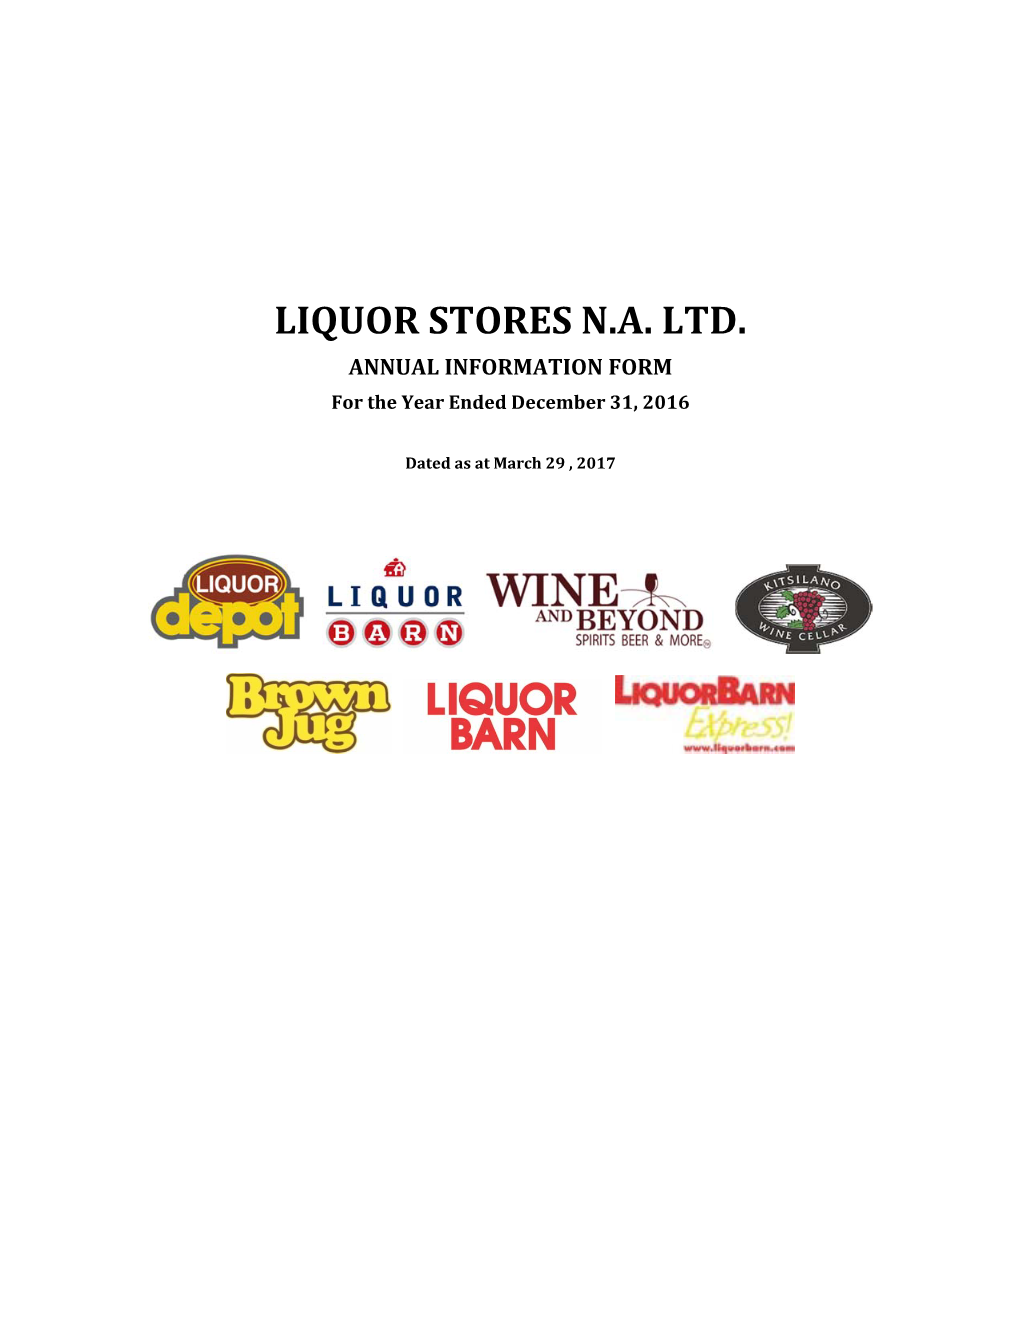 LIQUOR STORES N.A. LTD. ANNUAL INFORMATION FORM for the Year Ended December 31, 2016